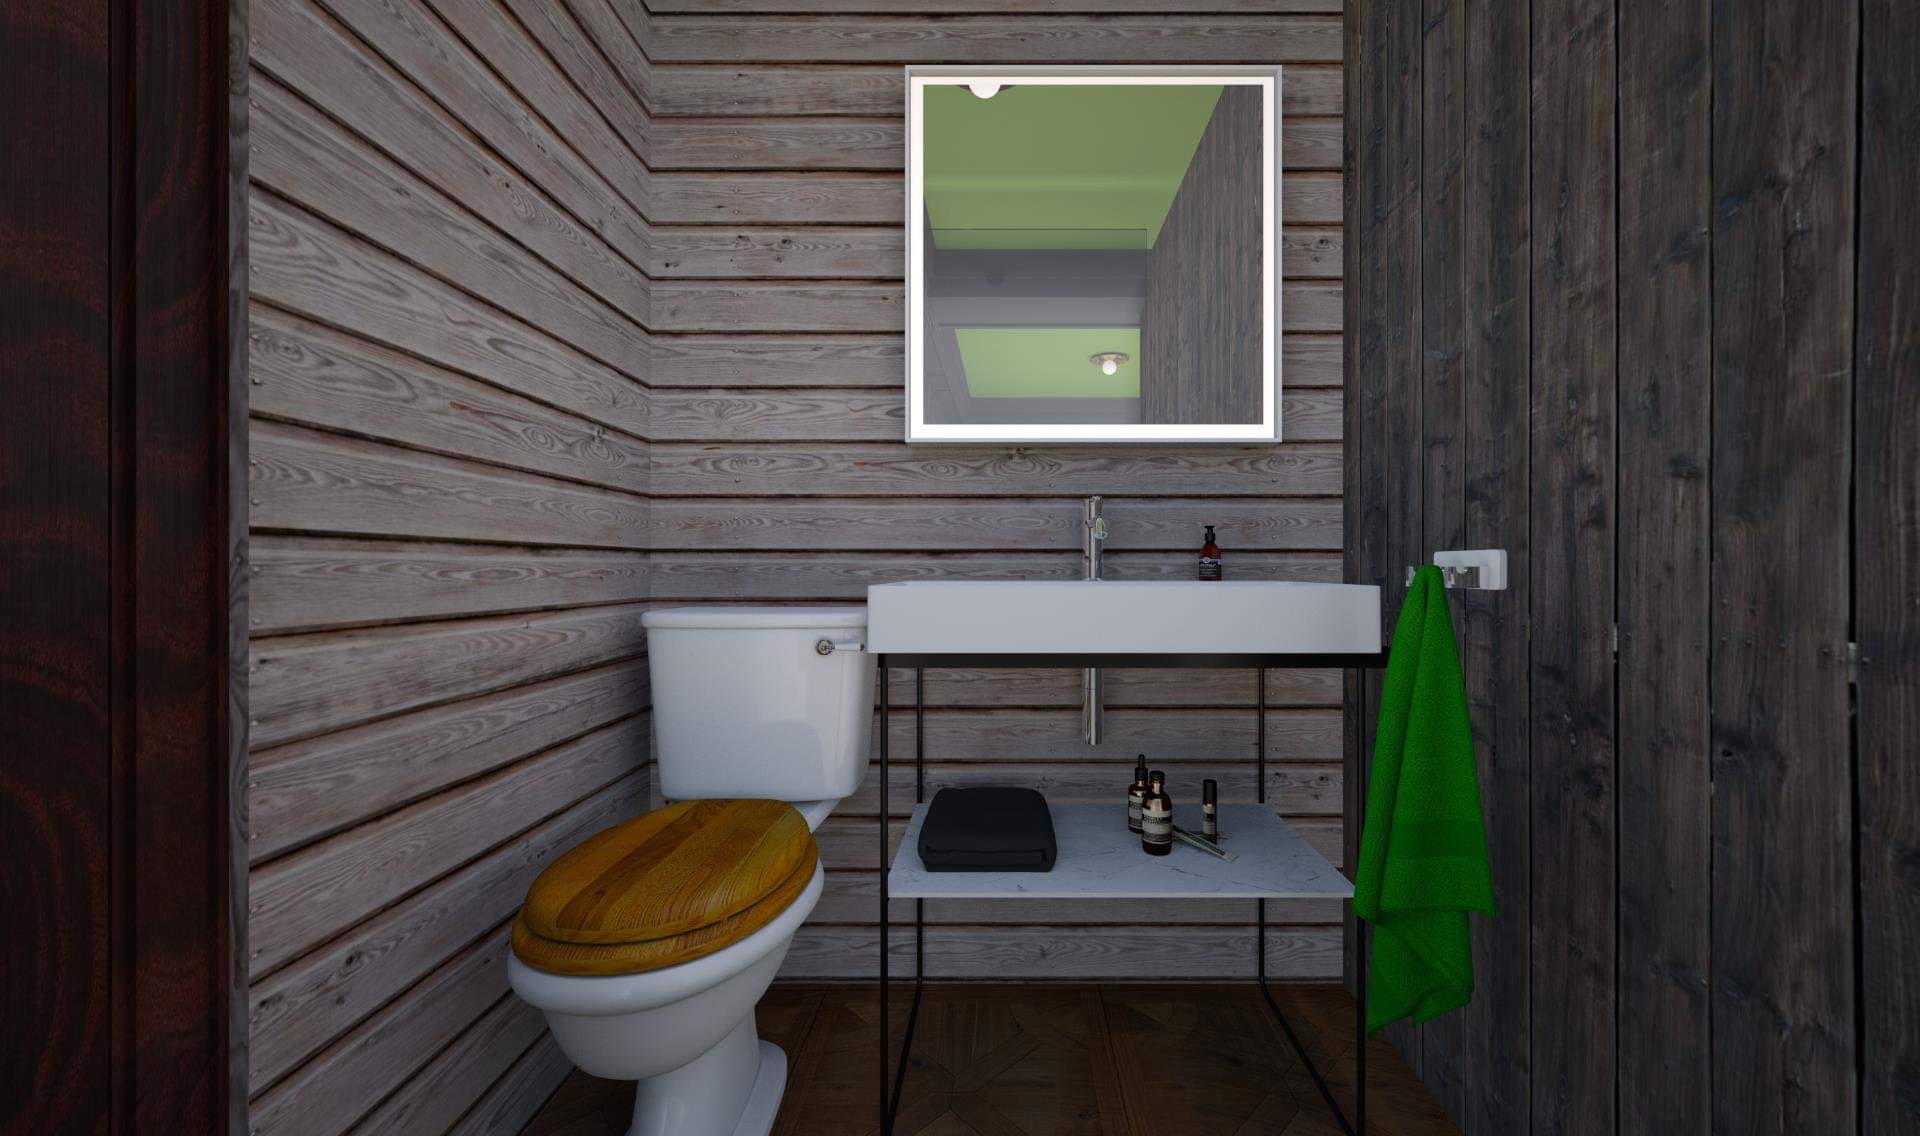 INT. WOODEN HOME BATHROOM – DAY